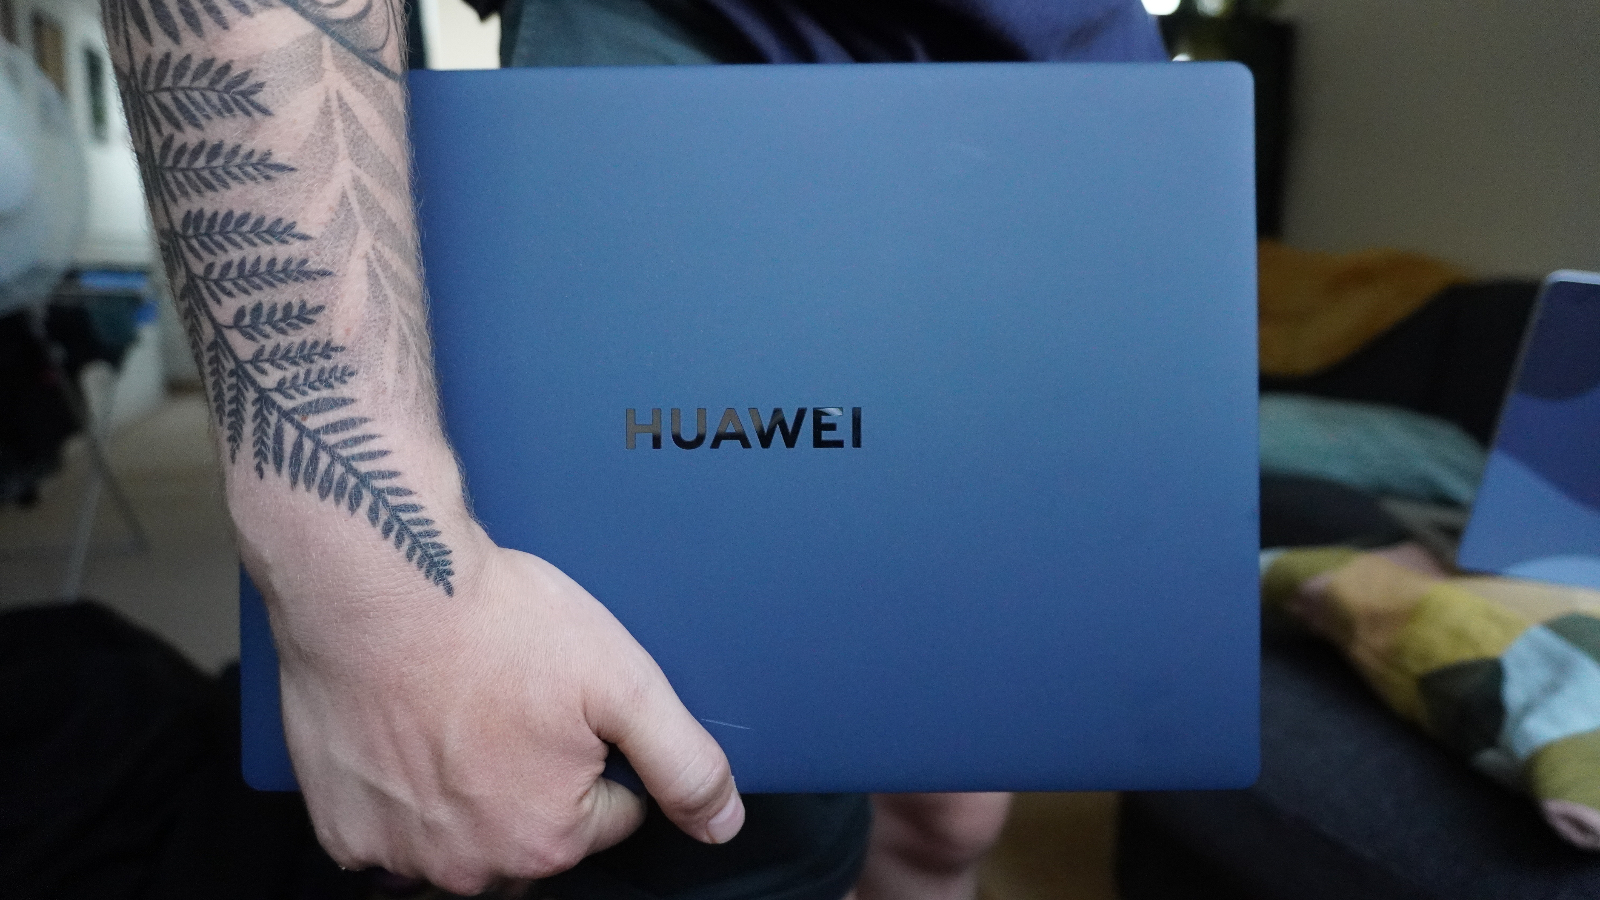 Huawei MateBook X Pro (2023) hands-on impressions: More of the same is not a bad thing